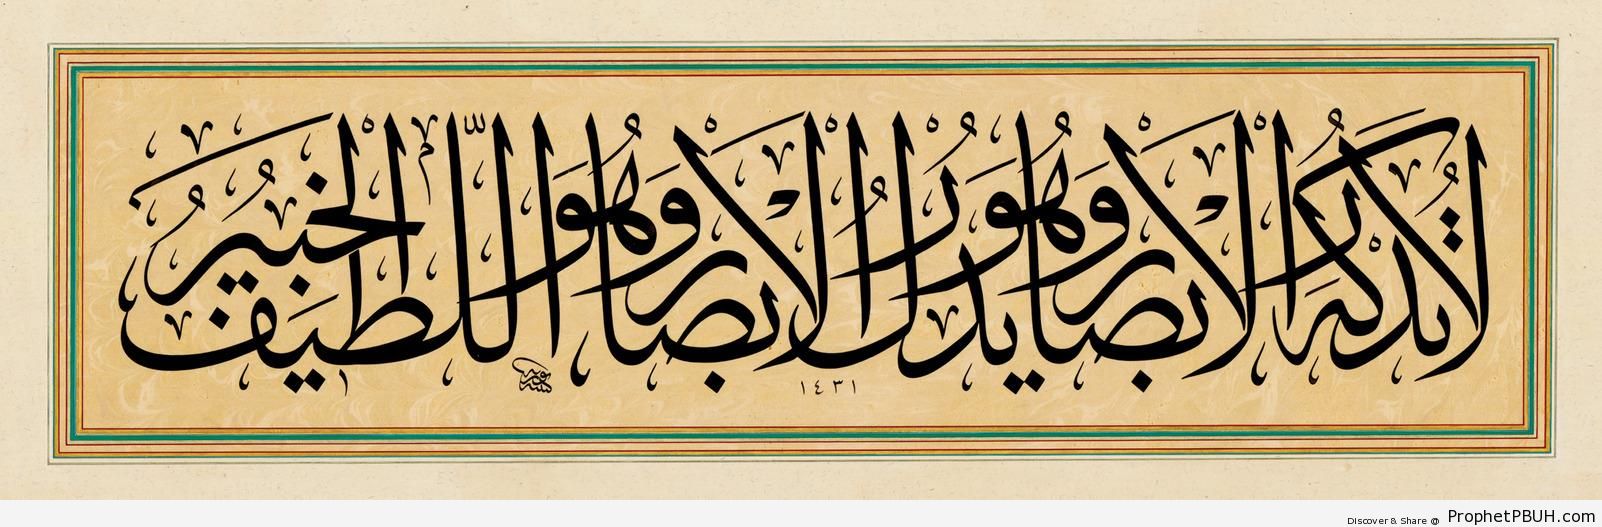 Surat al-An`am 6-103 Calligraphy - Islamic Calligraphy and Typography